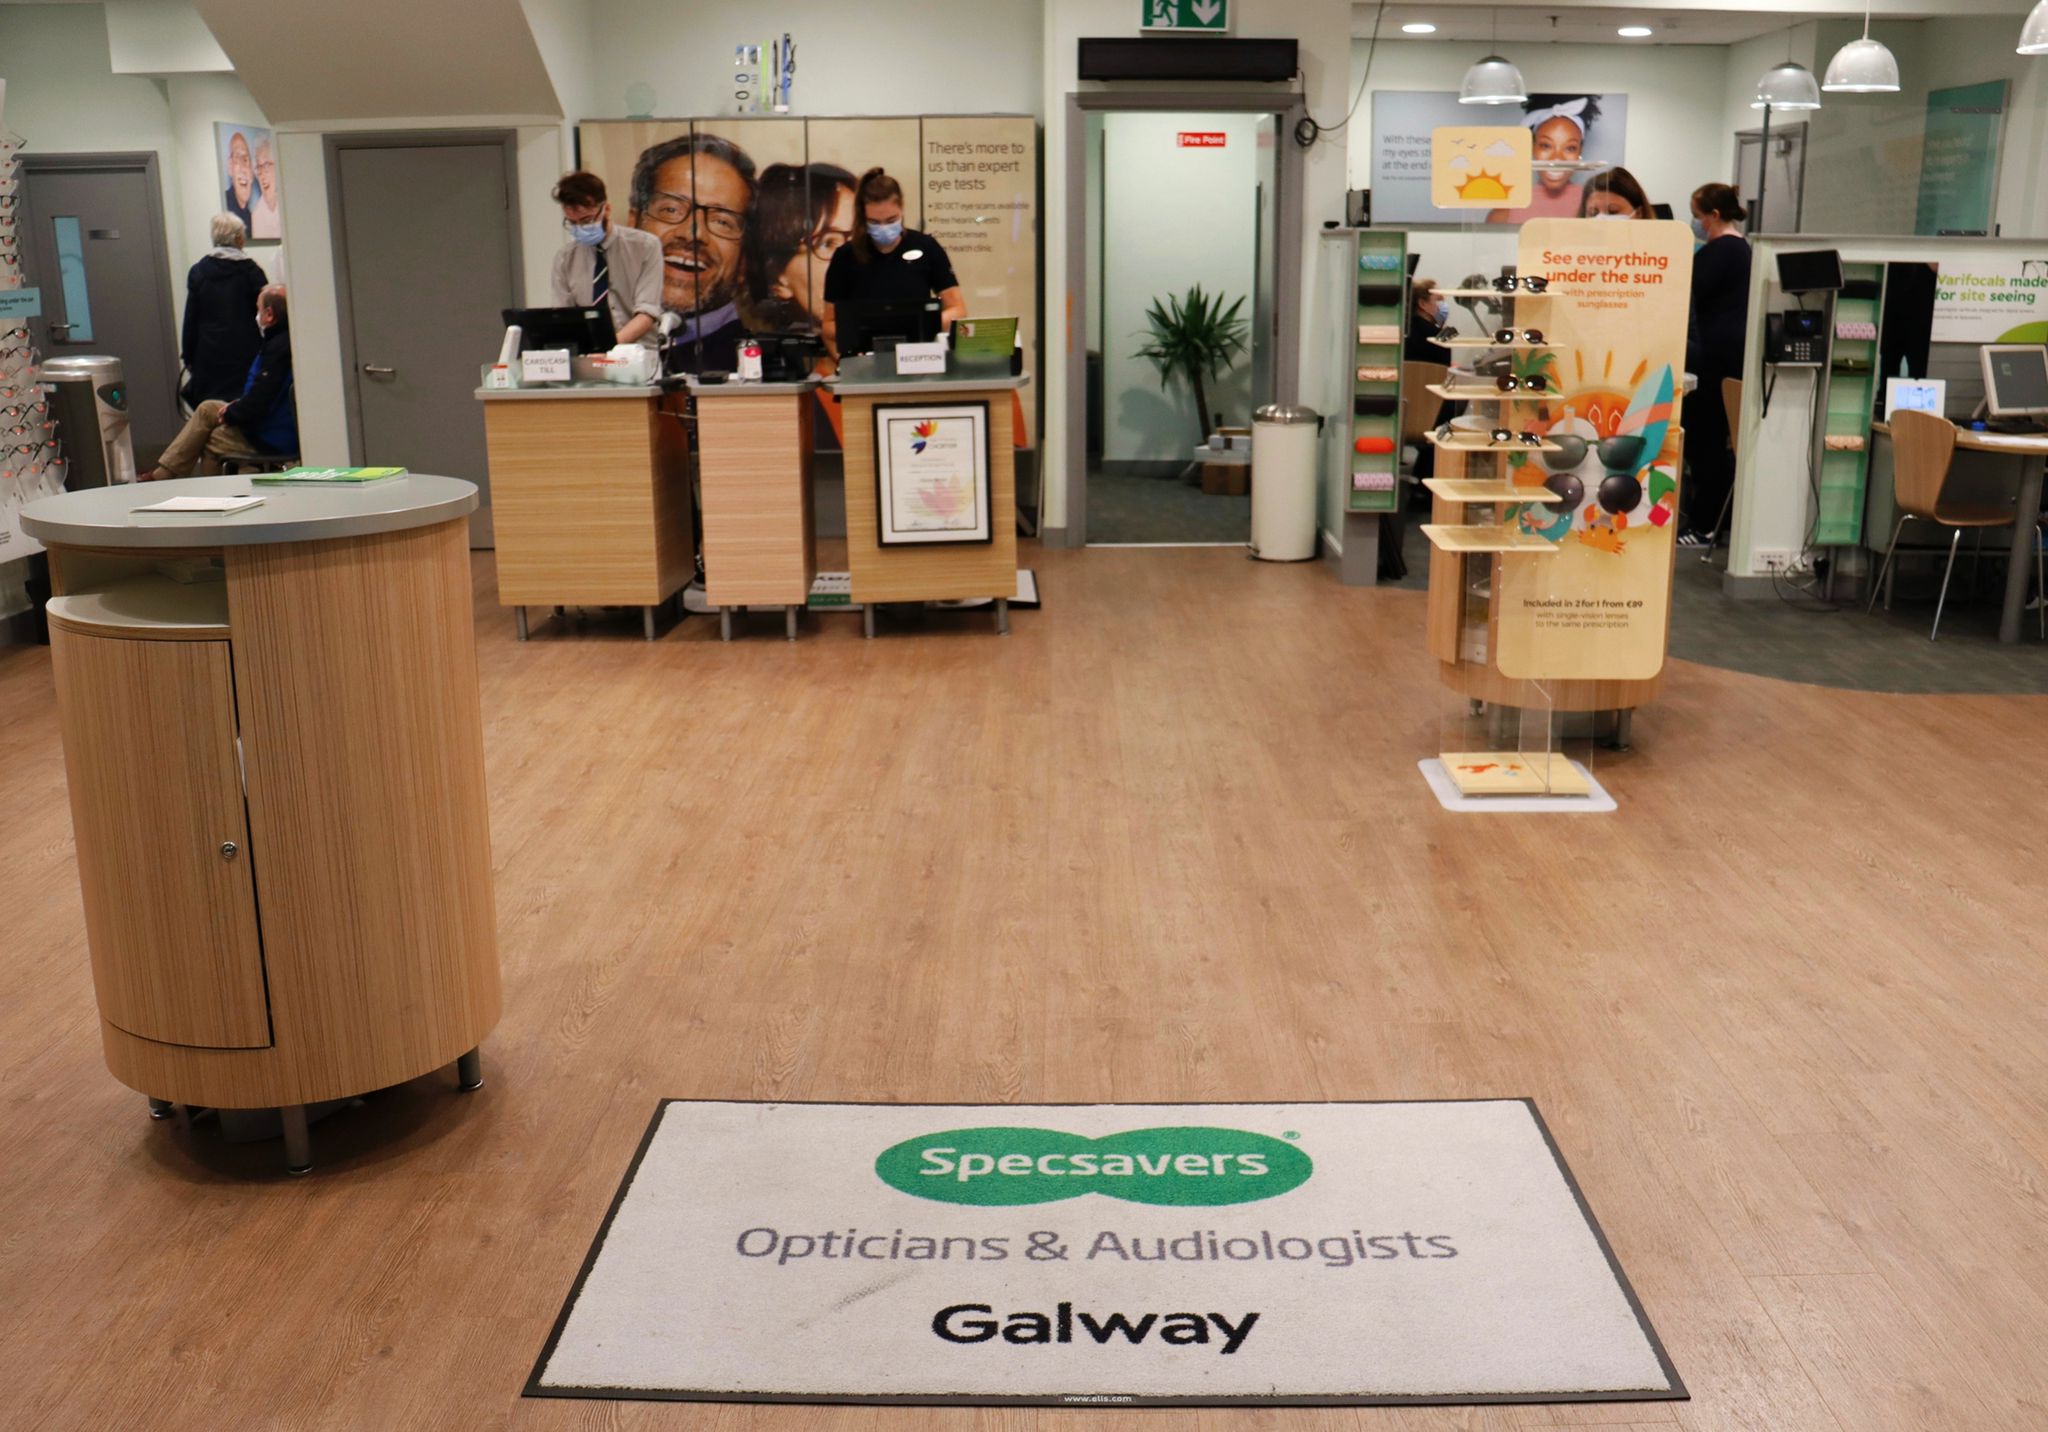 Specsavers Opticians & Audiologists - Galway - Eyre Square Centre 20